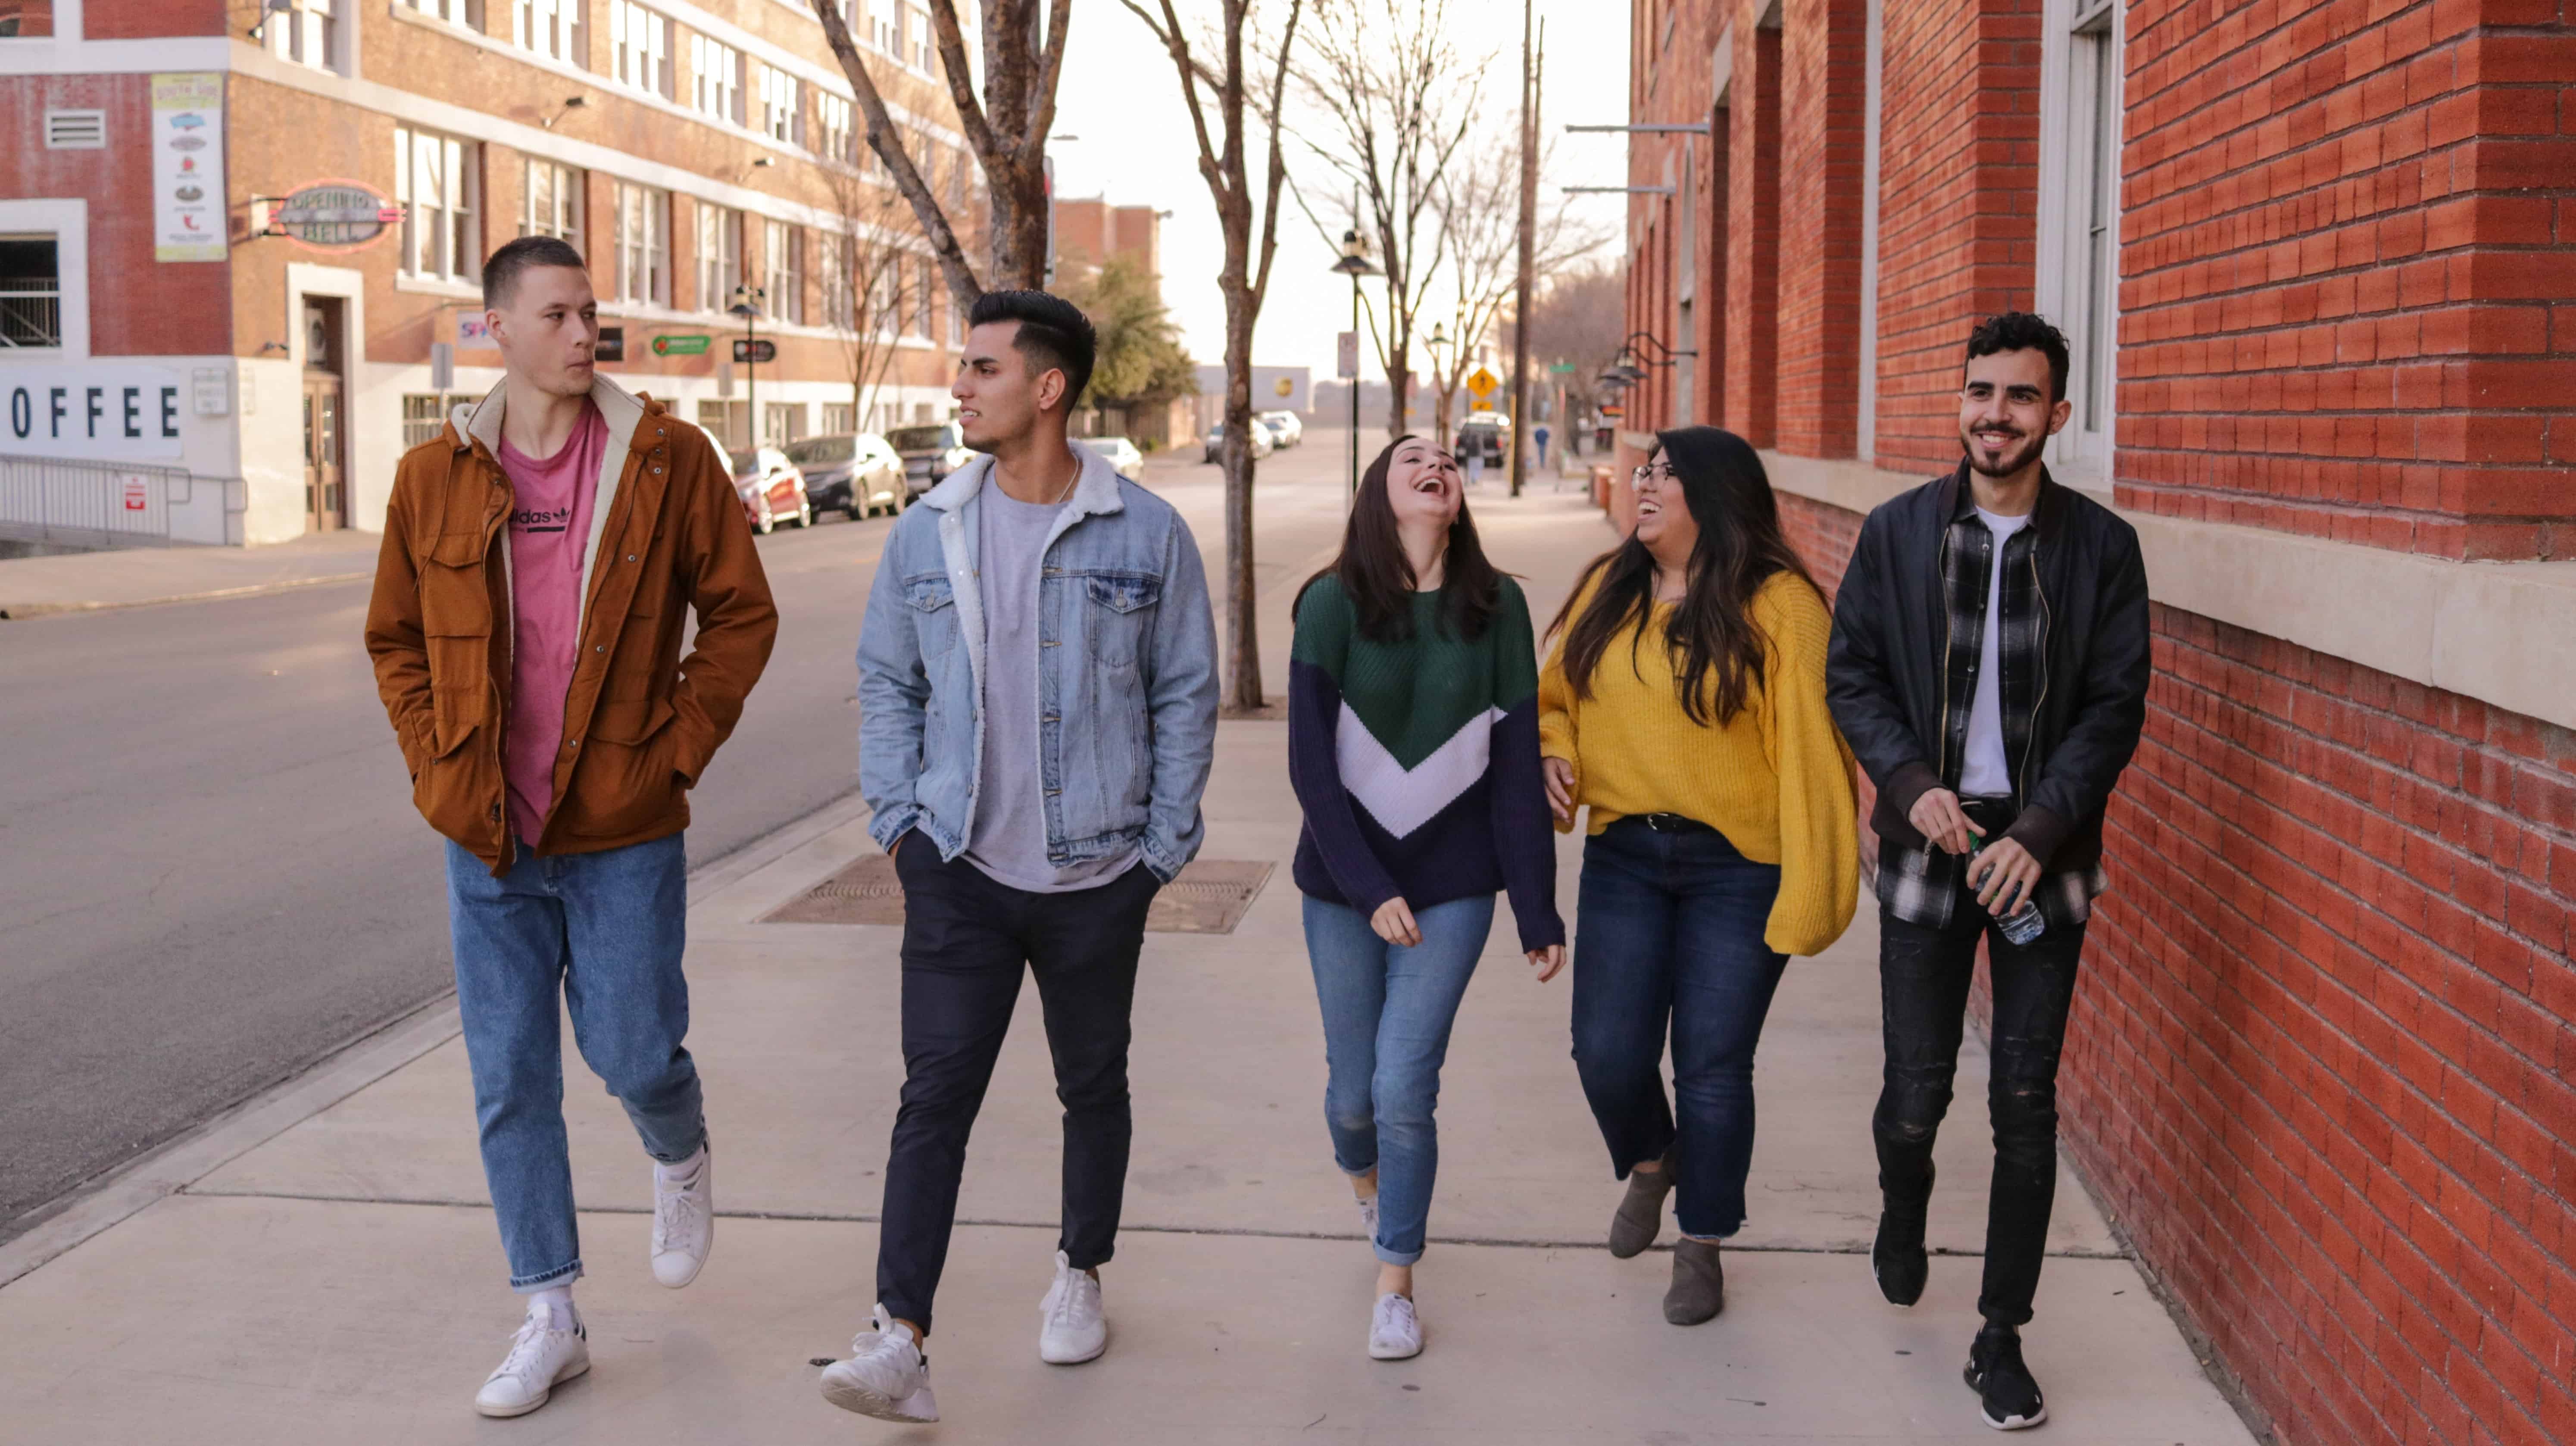 A group of students walks and talks on campus